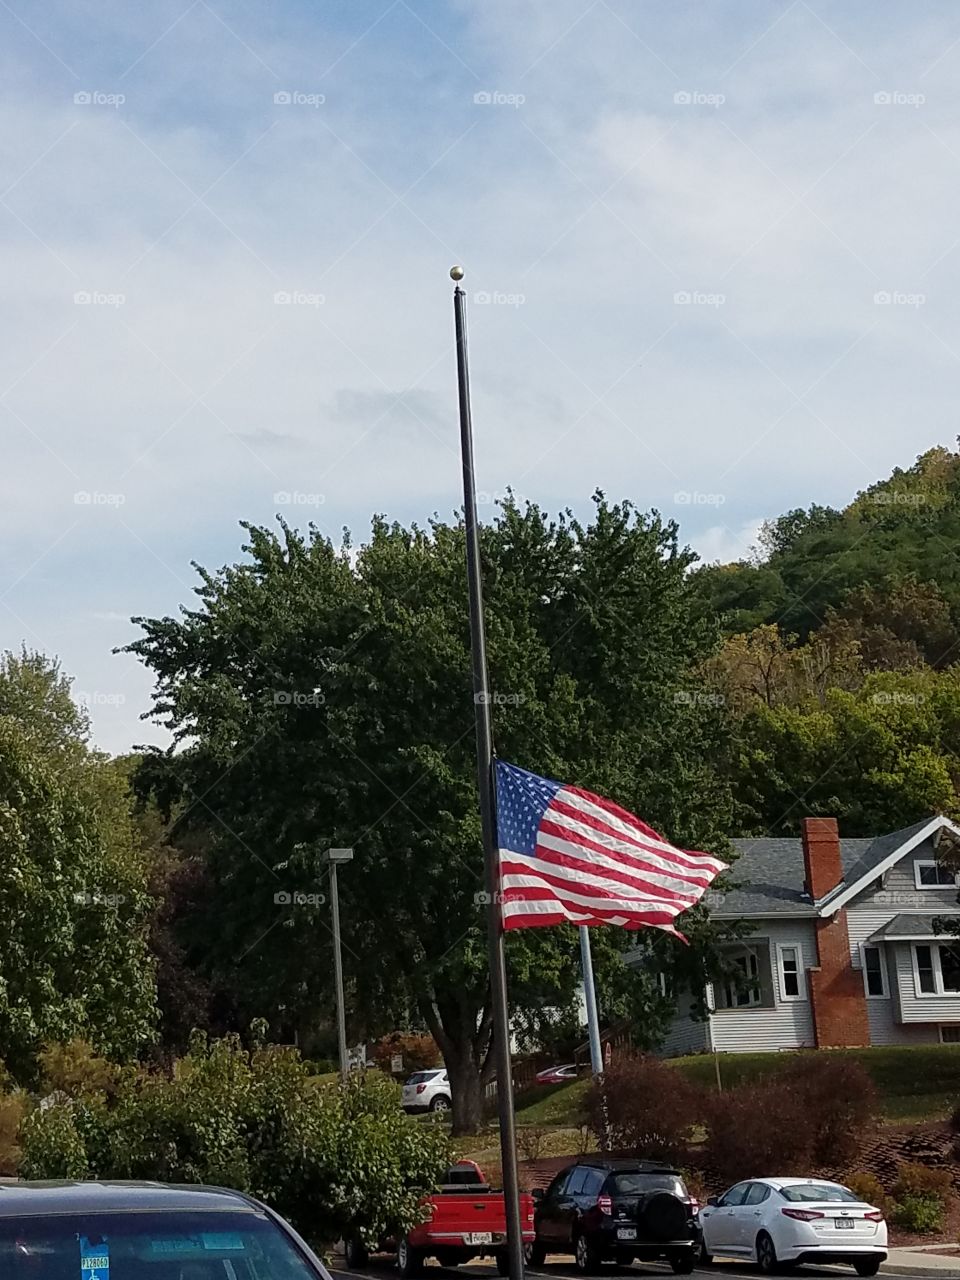 The American flag flying at half mass after shootings in another state.